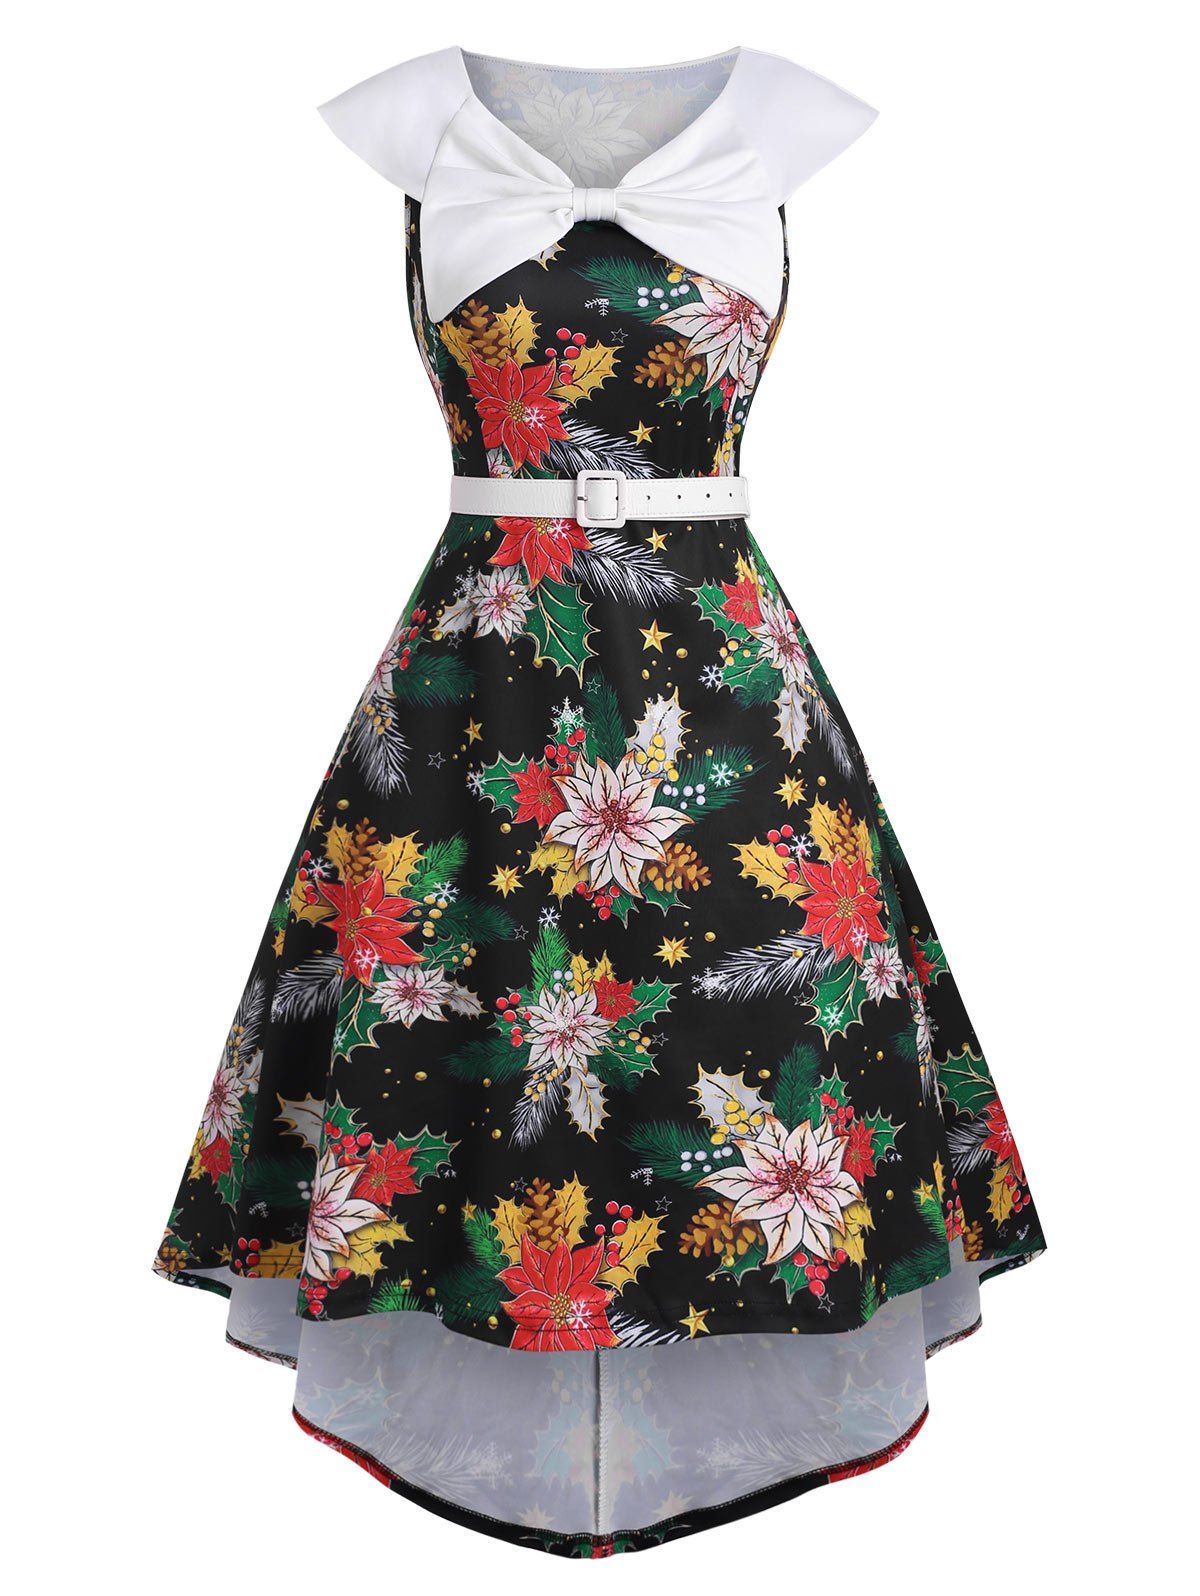 Christmas Party Dress High Low Midi Dress Bowknot Plant Floral Print Belted High Waist Sleeveless Vintage Dress 